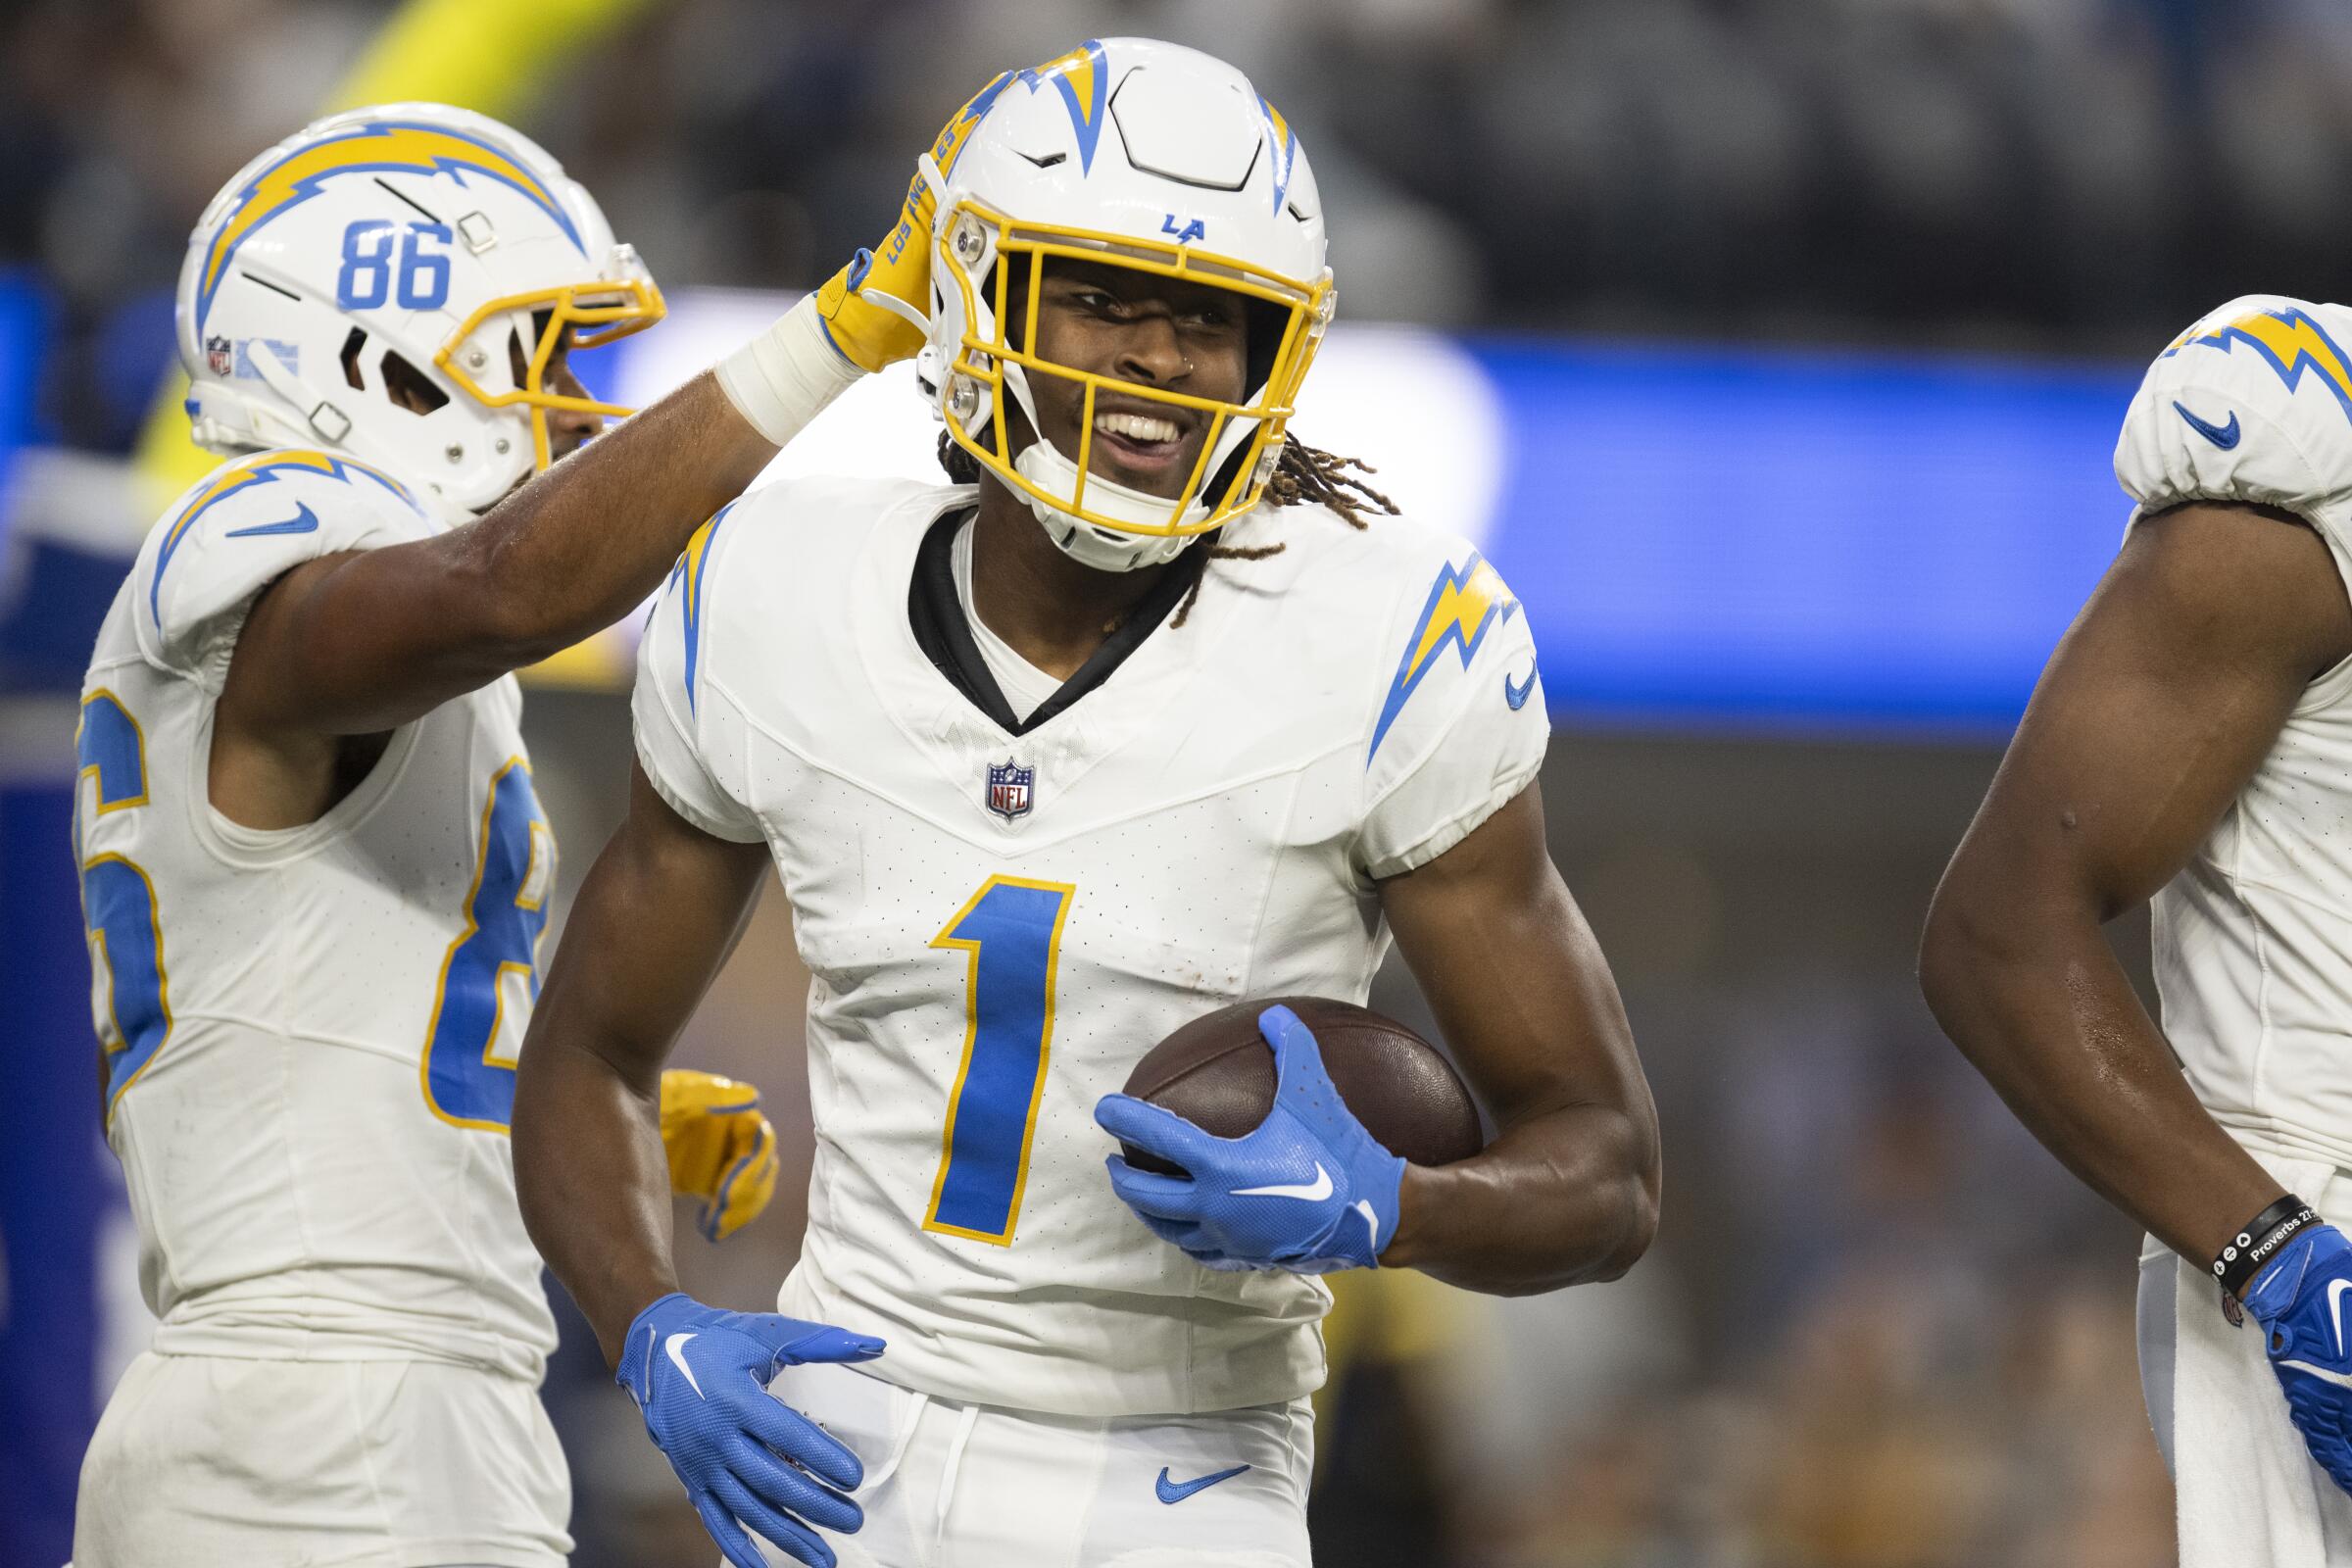 best chargers receivers